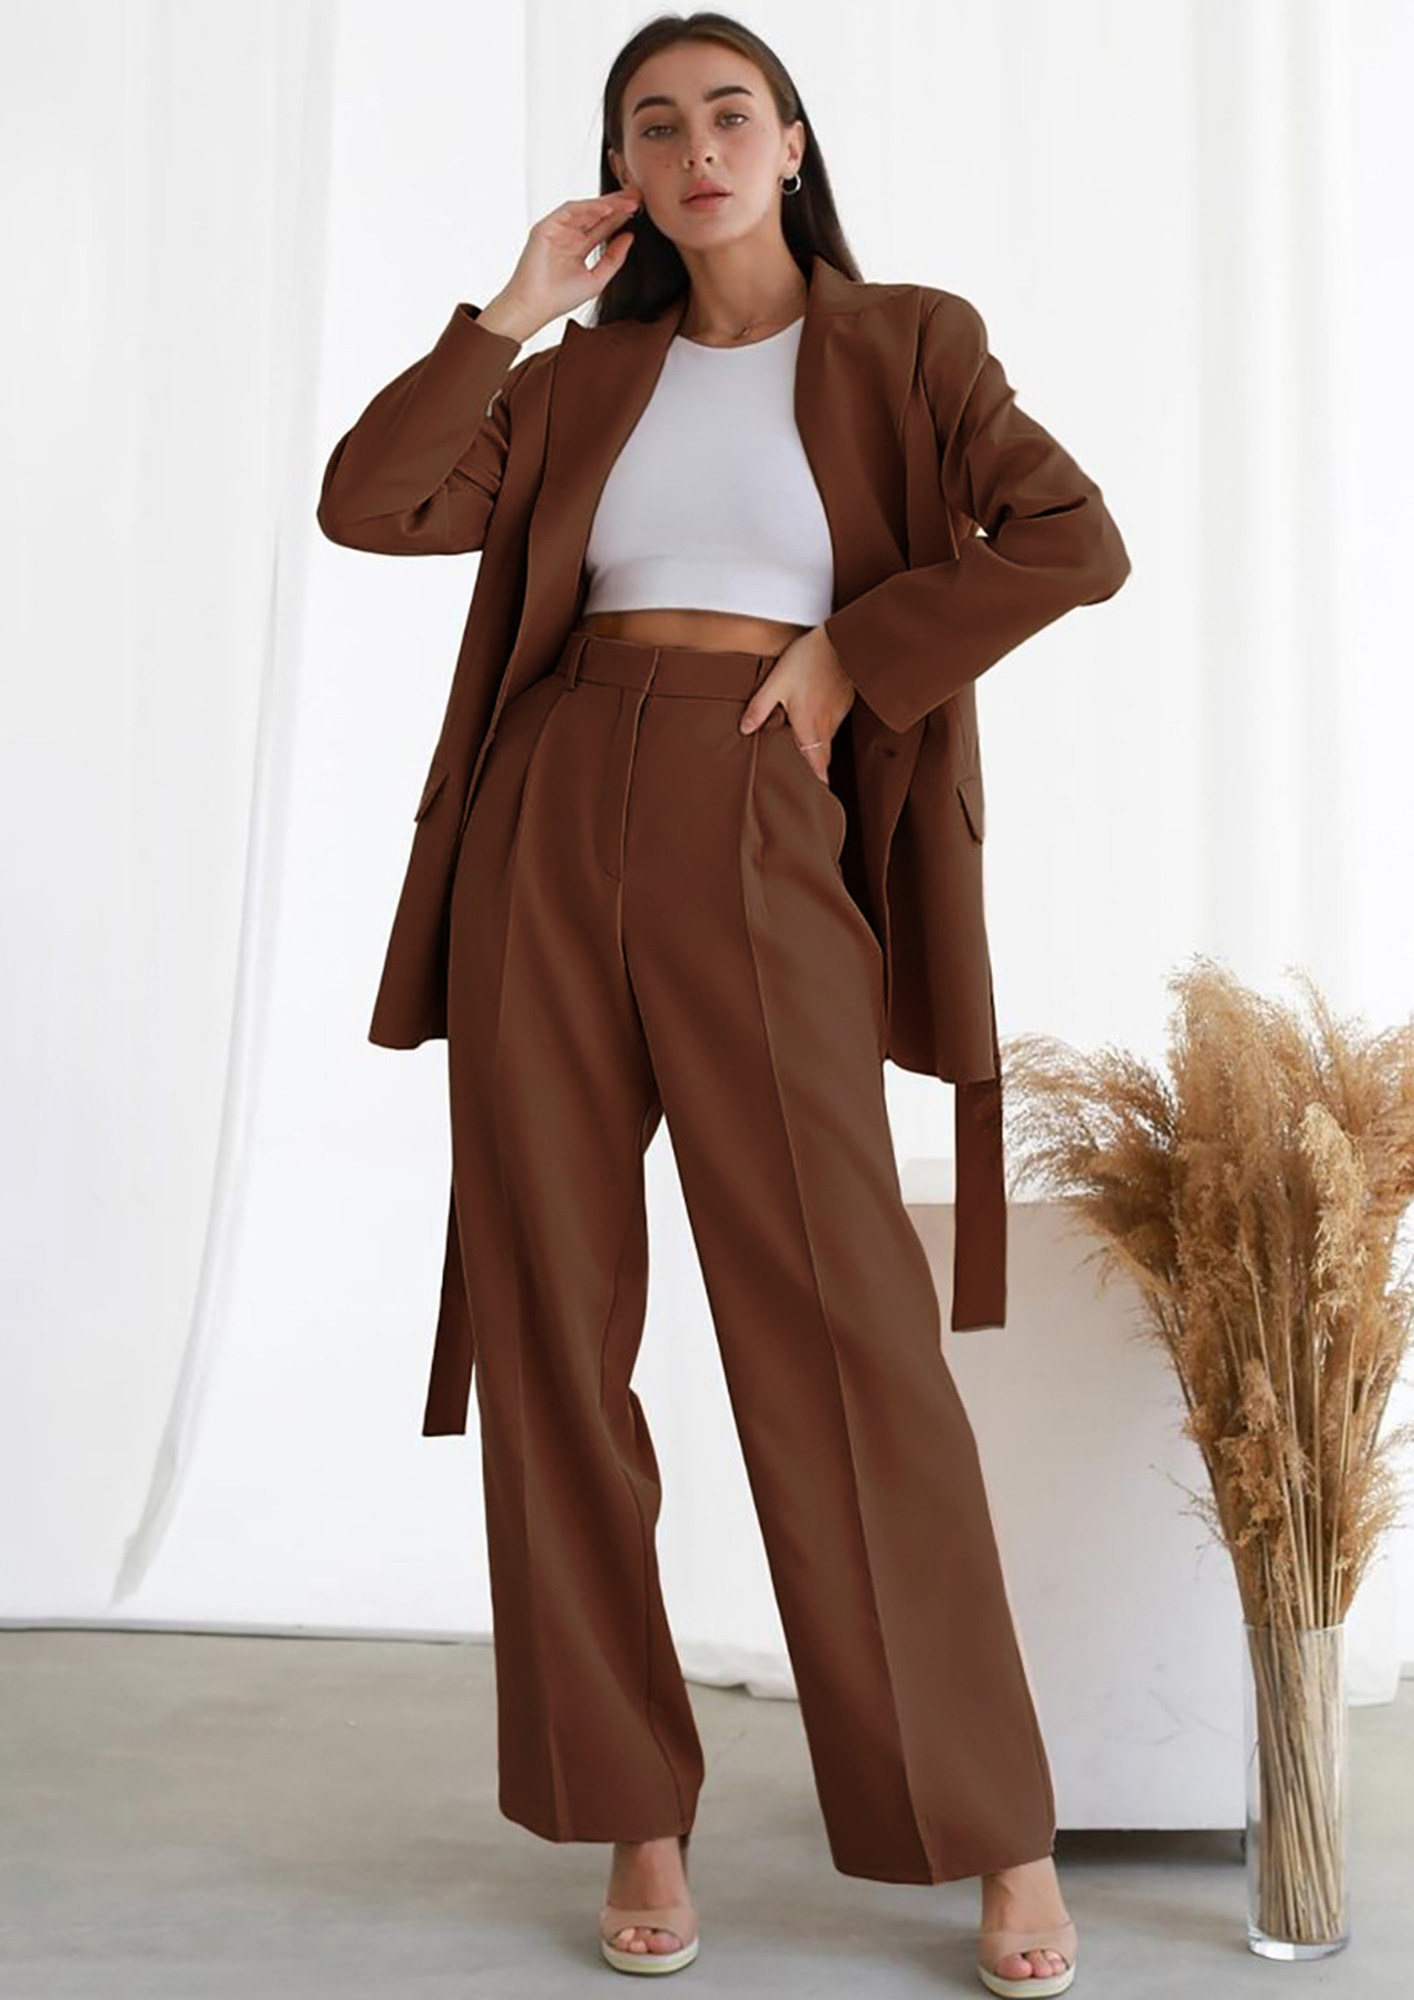 Share 149+ chocolate brown trousers womens latest - camera.edu.vn